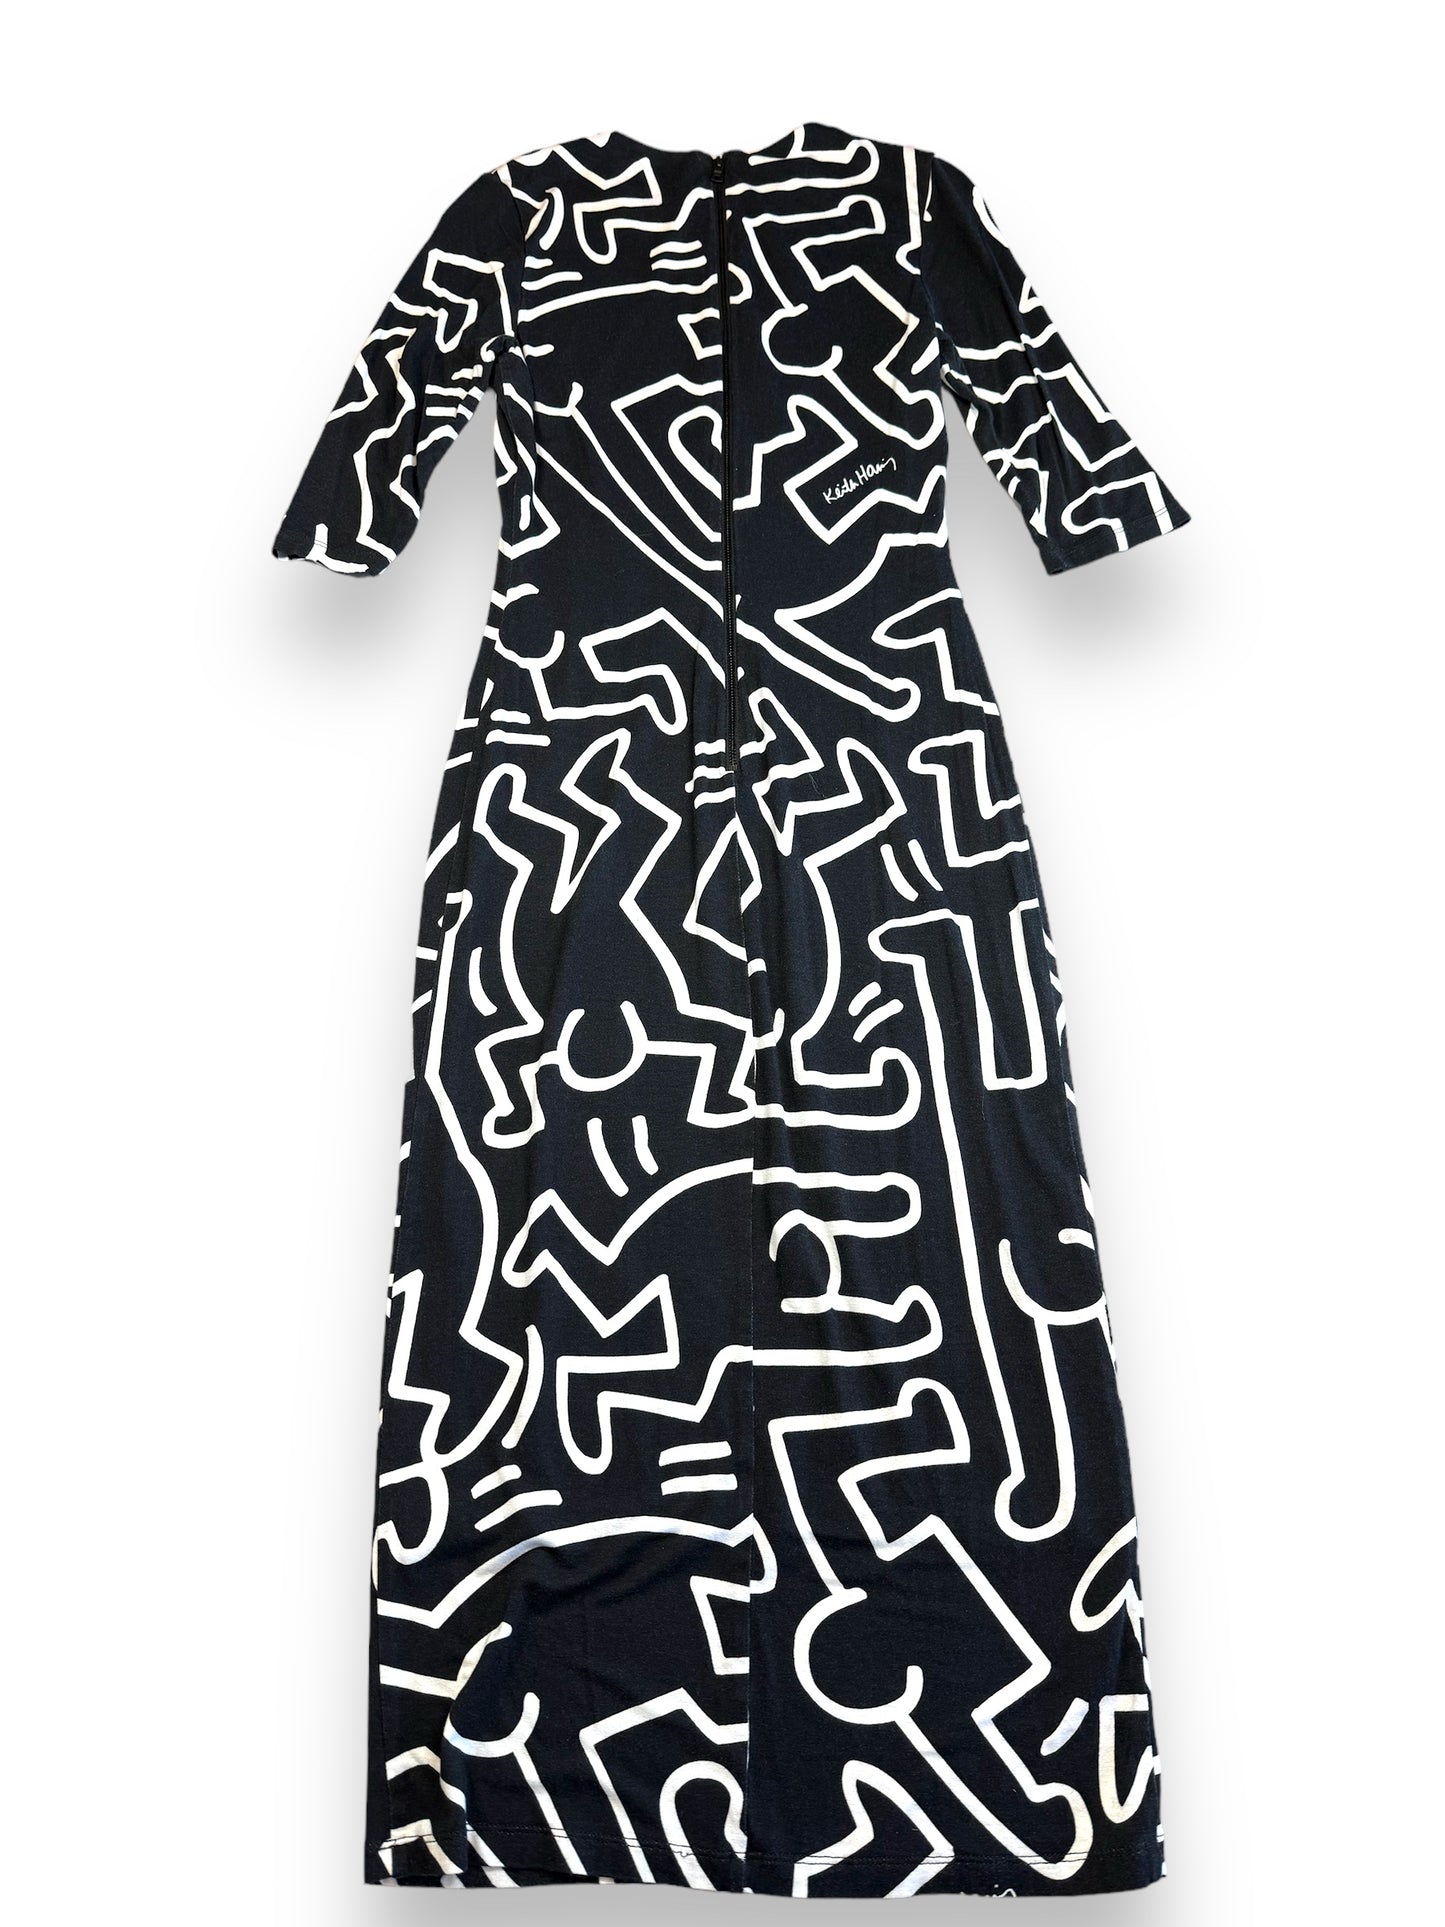 Trend: Alice + Olivia Black and White Keith Haring Body con Dress